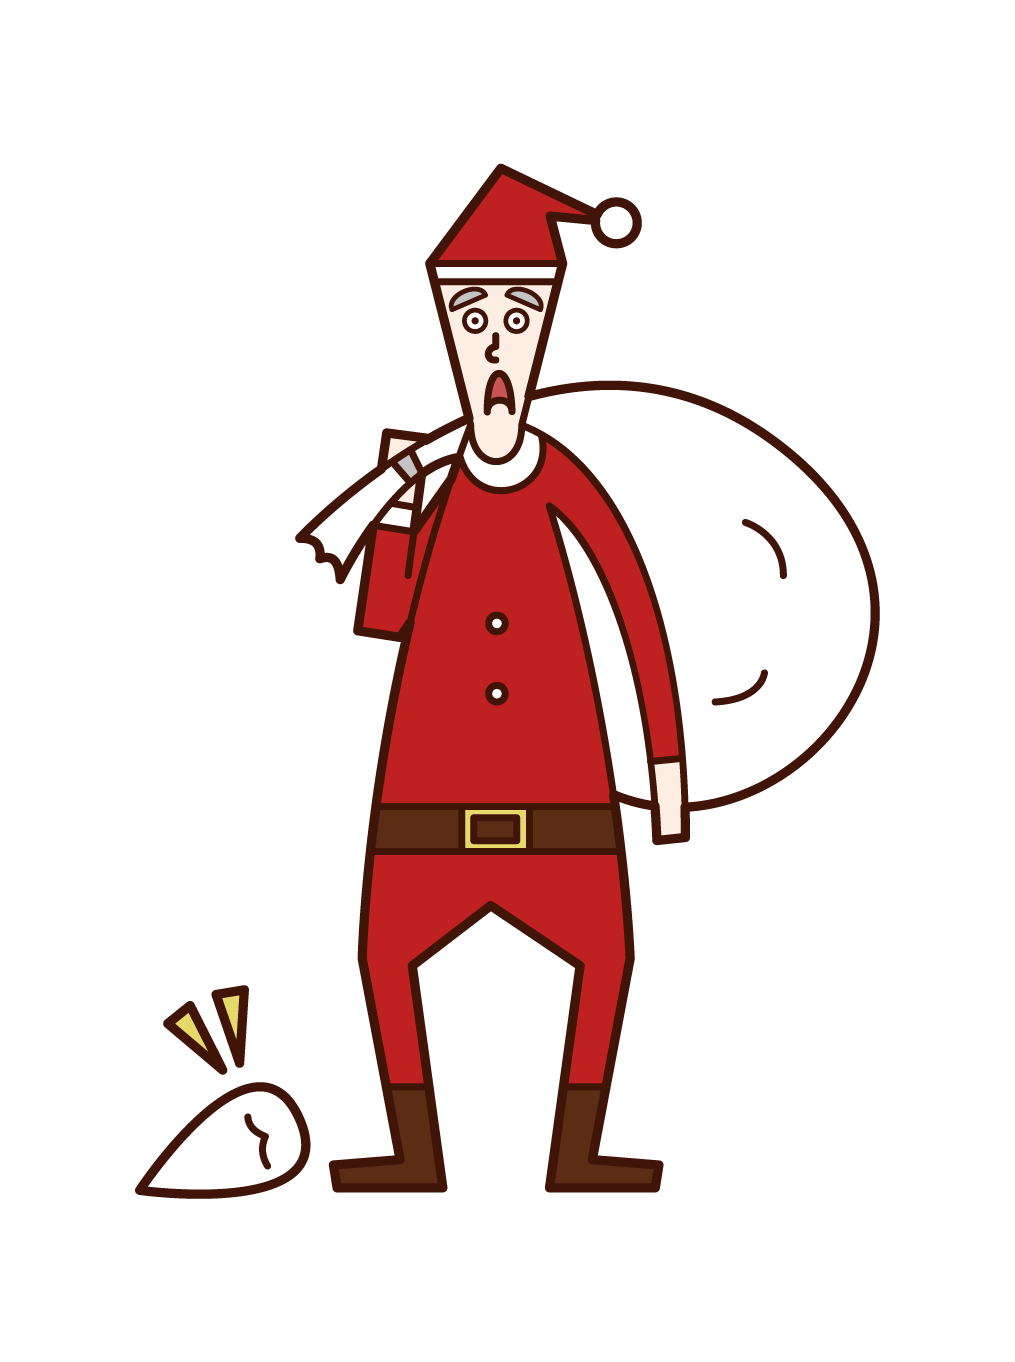 Illustration of Santa Claus (man) who dropped the axe